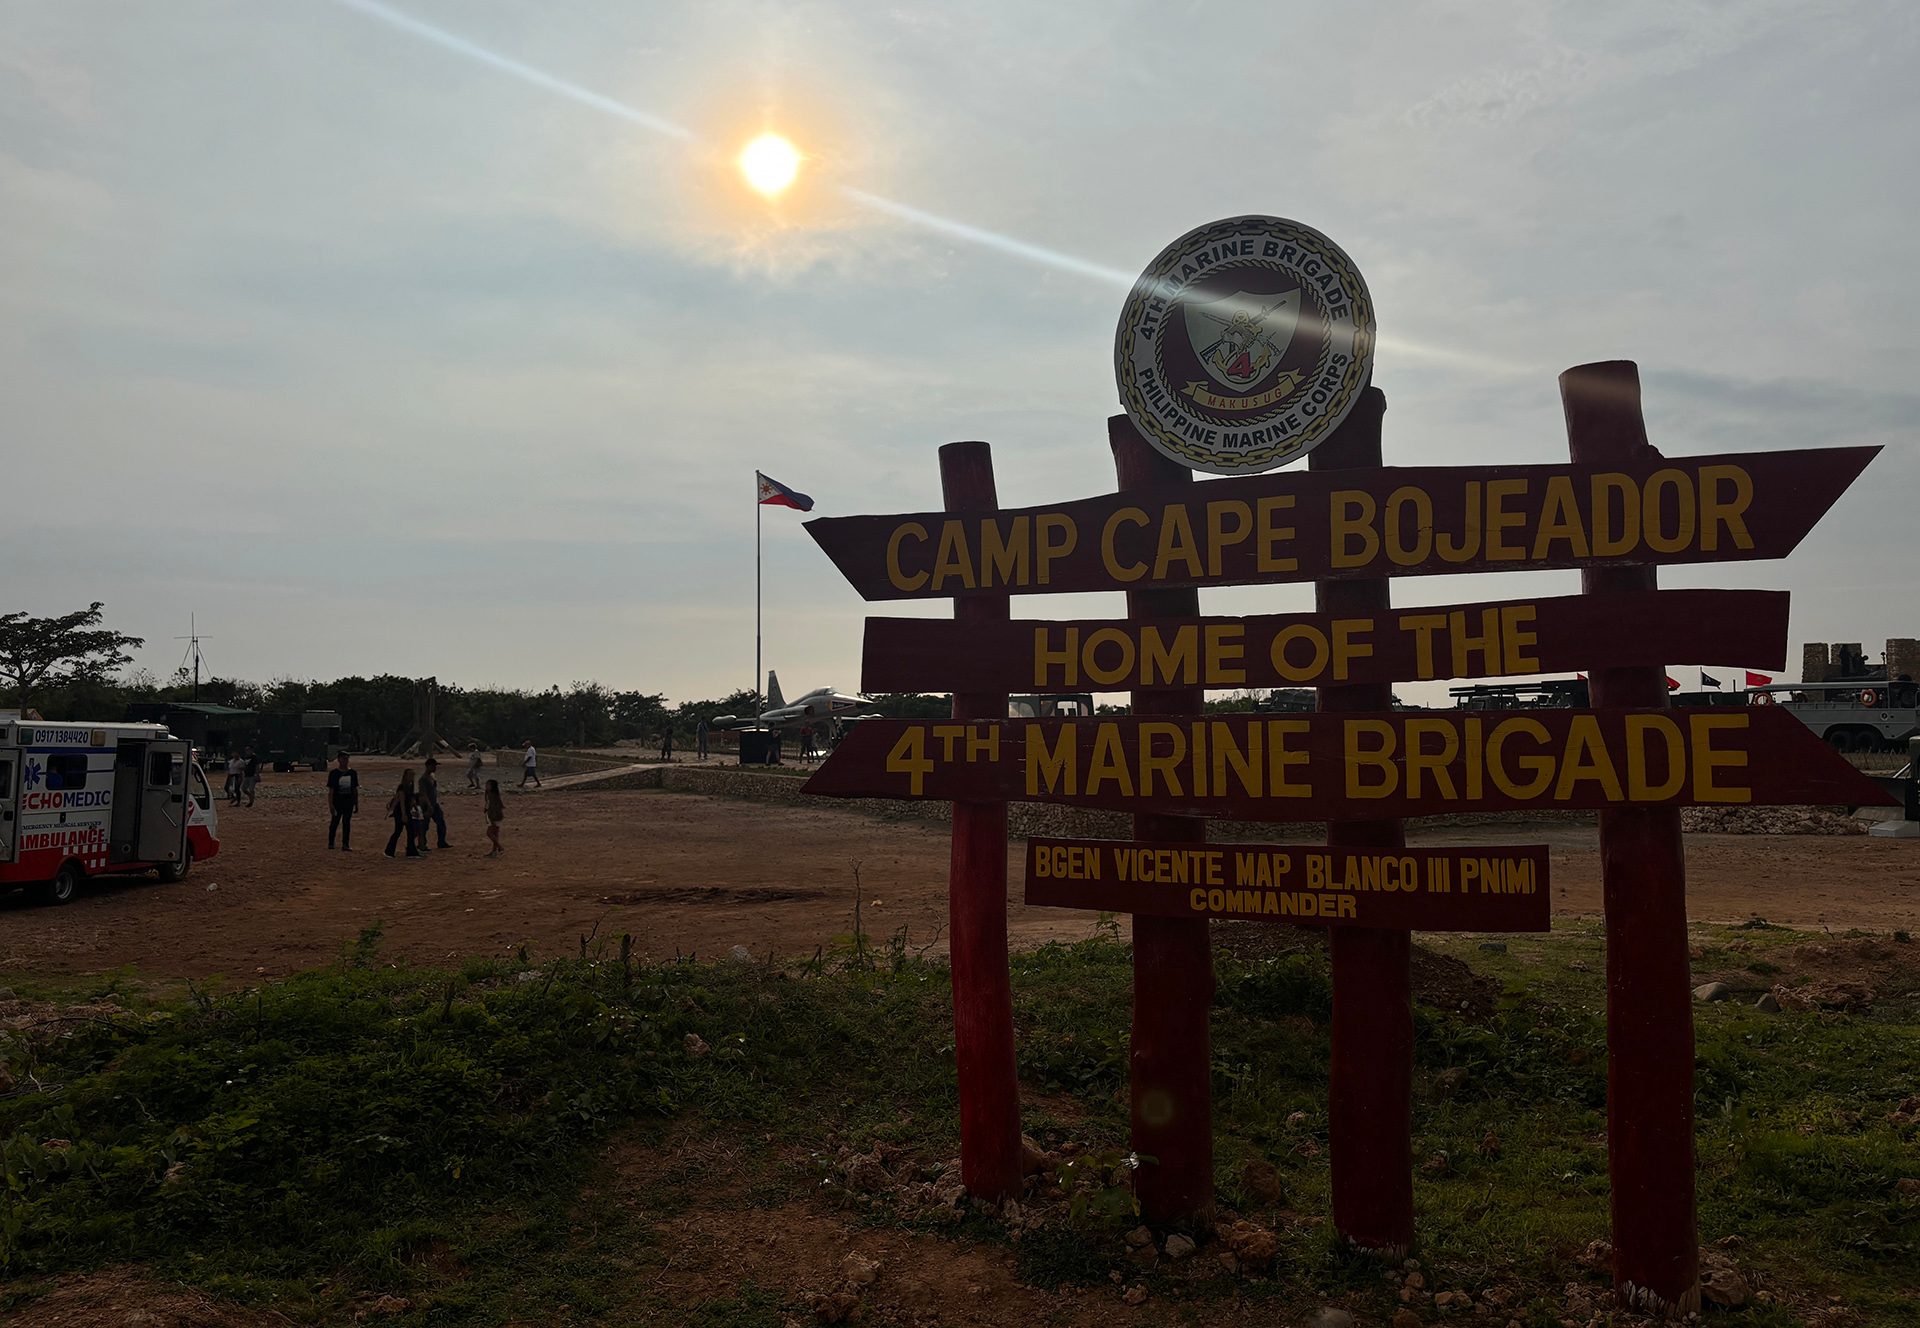 From Sulu to Burgos, the Marines’ Fourth Brigade comes home